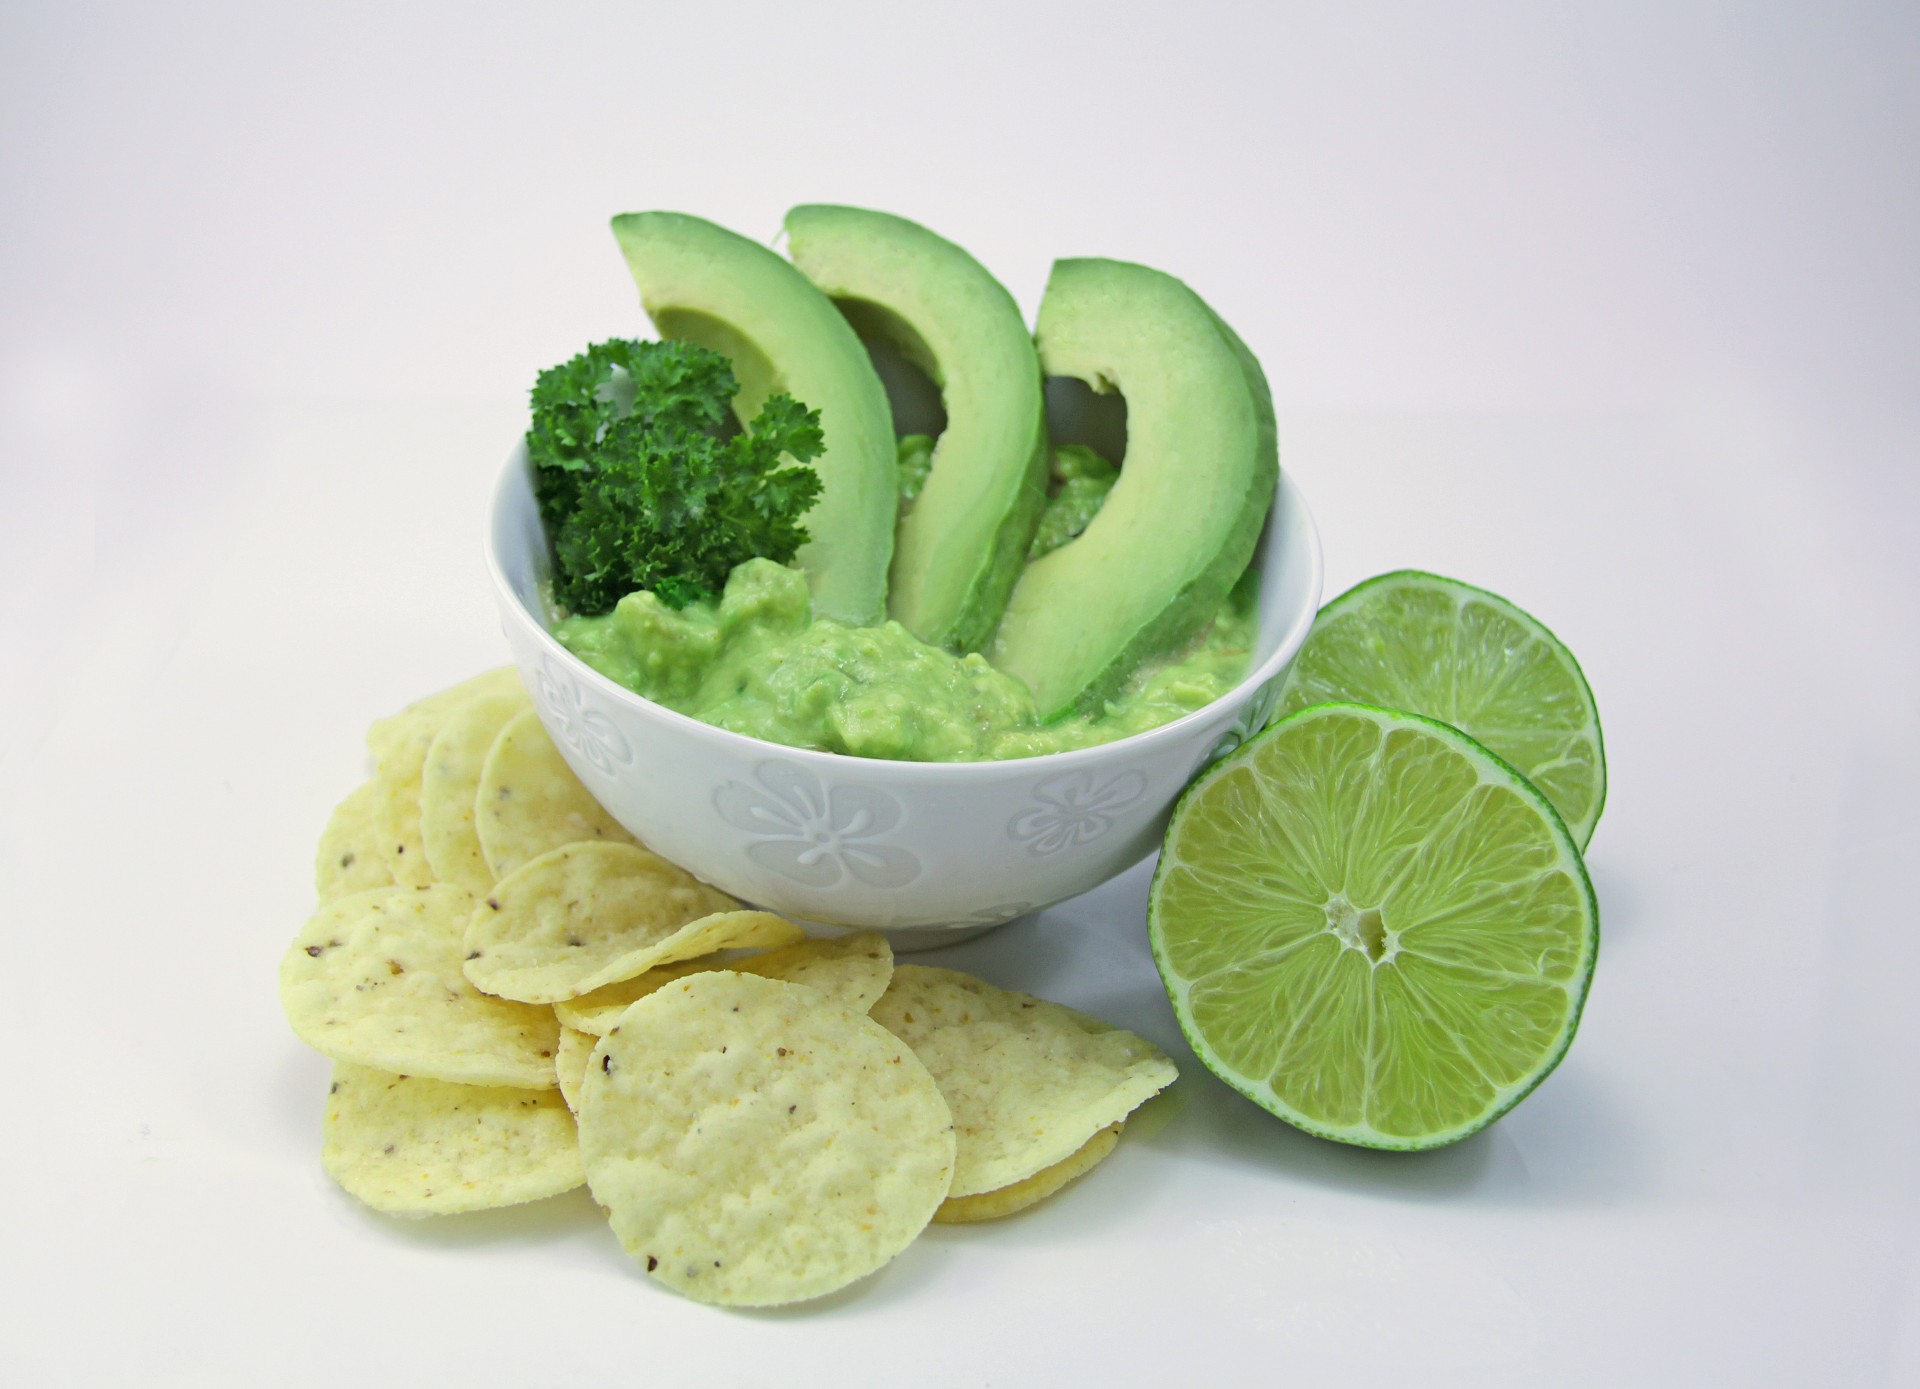 Homemade Texas Chips With Guacamole Spread